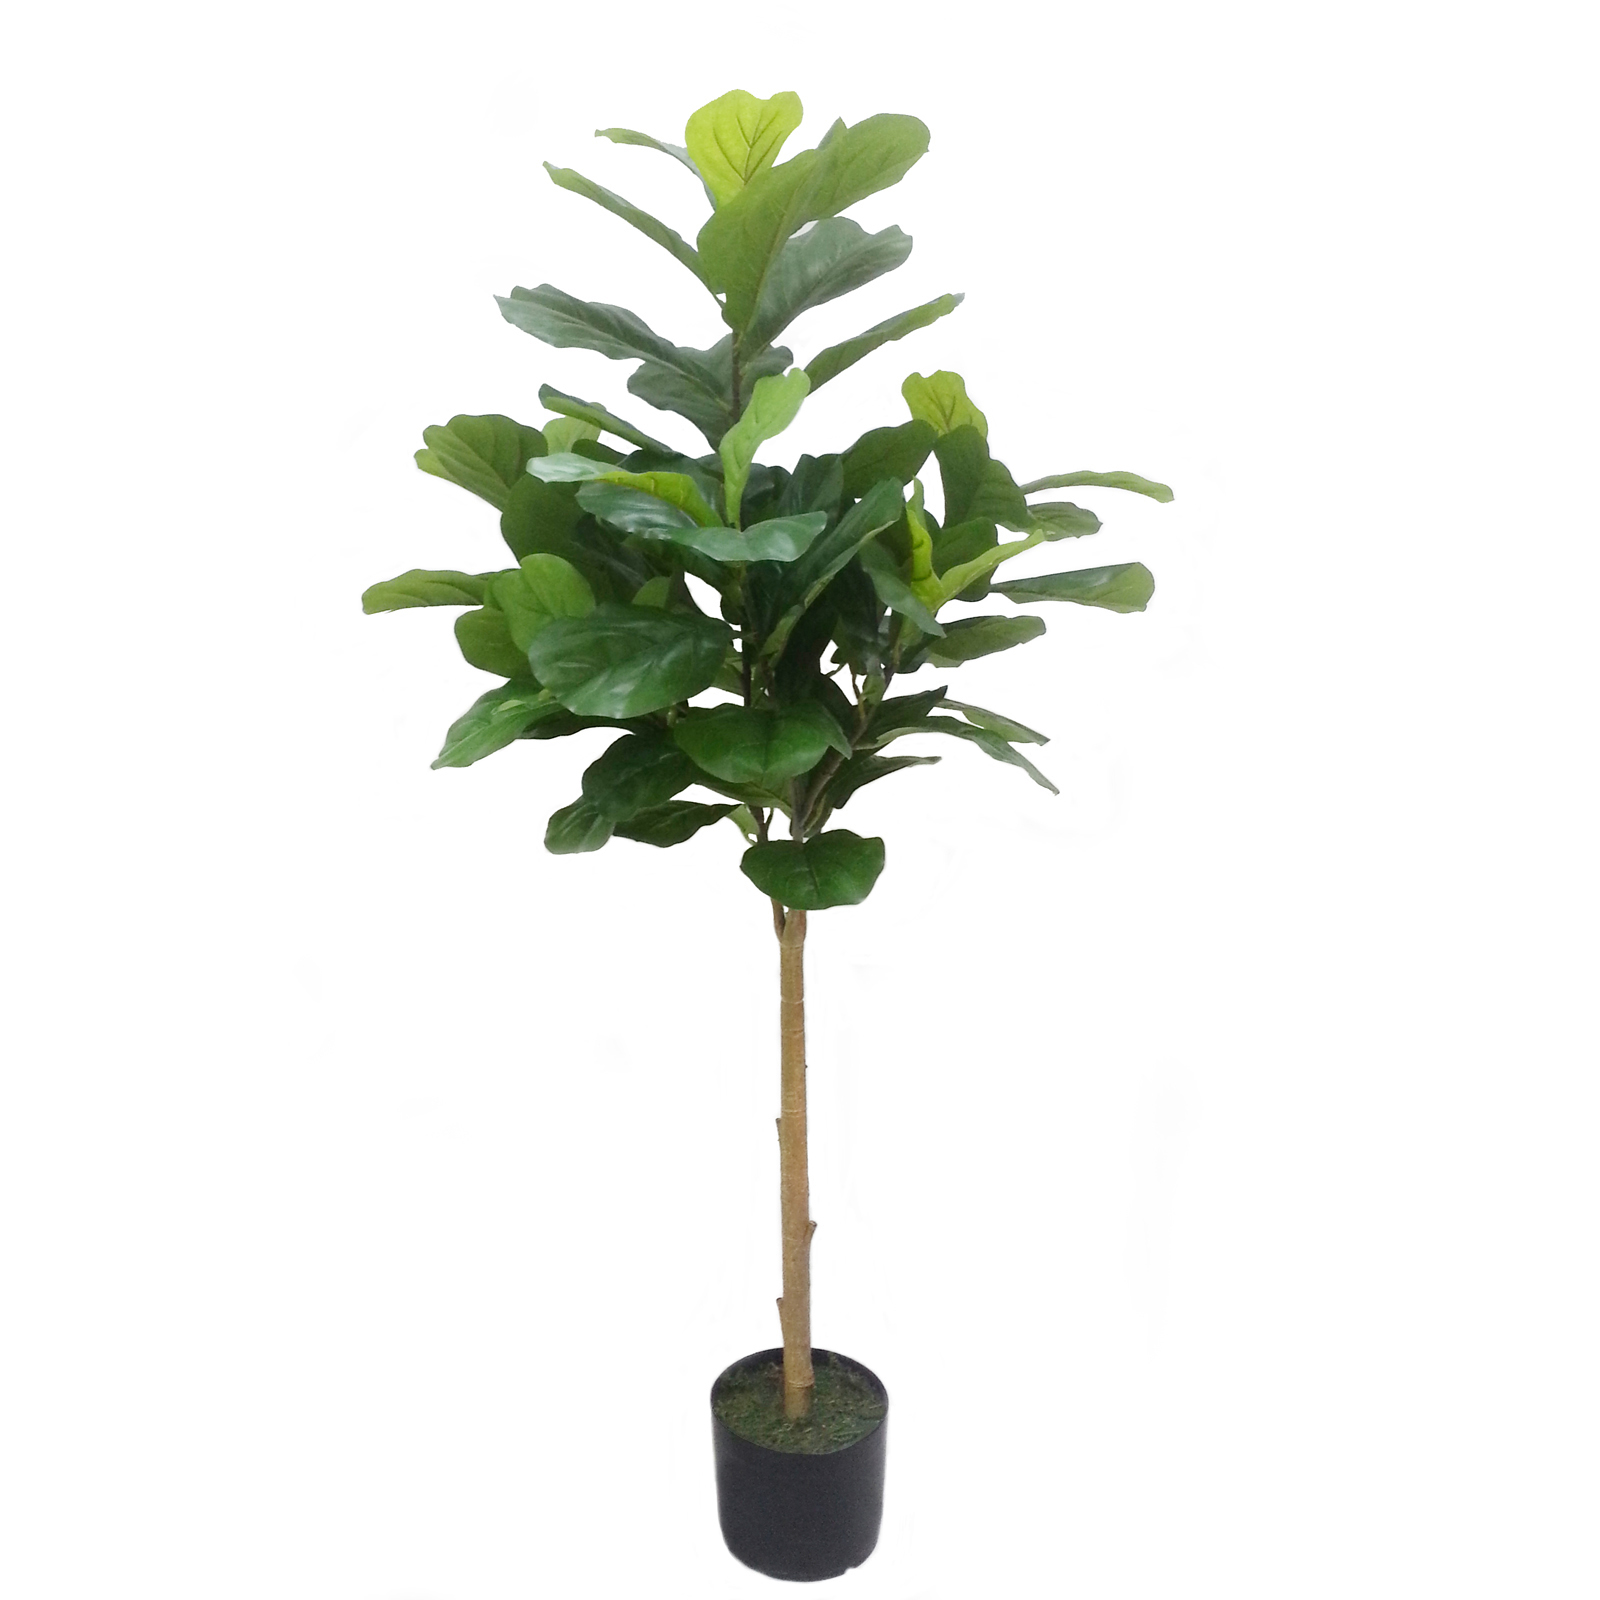 Buy the Real Touch Artificial Fiddle Leaf Tree By AshlandÃ‚Â® at Michaels - 